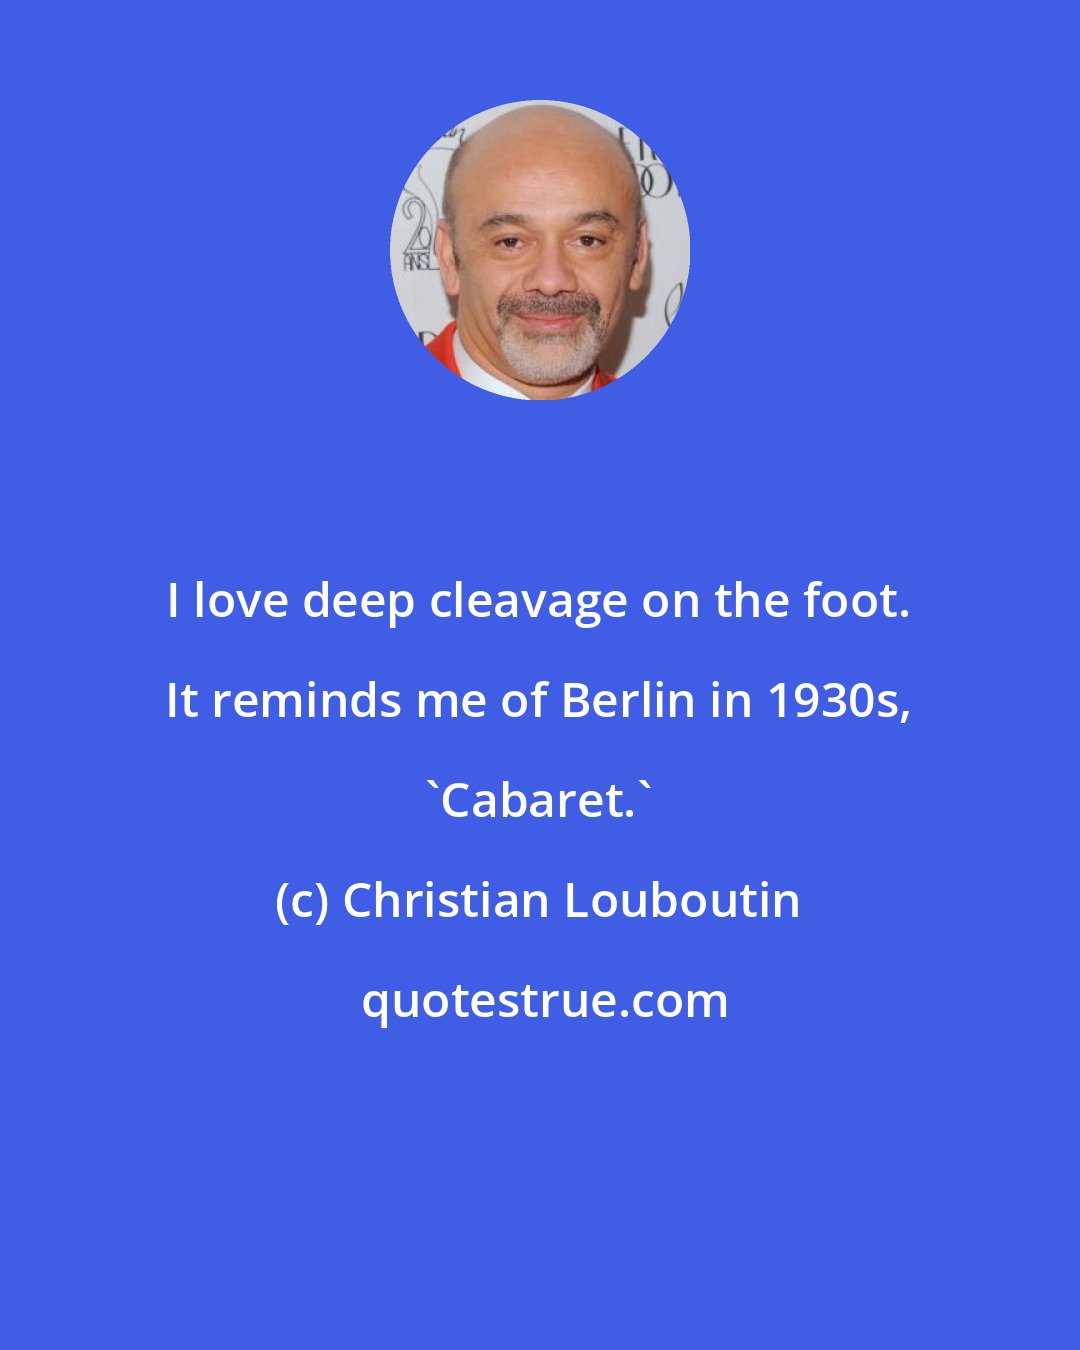 Christian Louboutin: I love deep cleavage on the foot. It reminds me of Berlin in 1930s, 'Cabaret.'